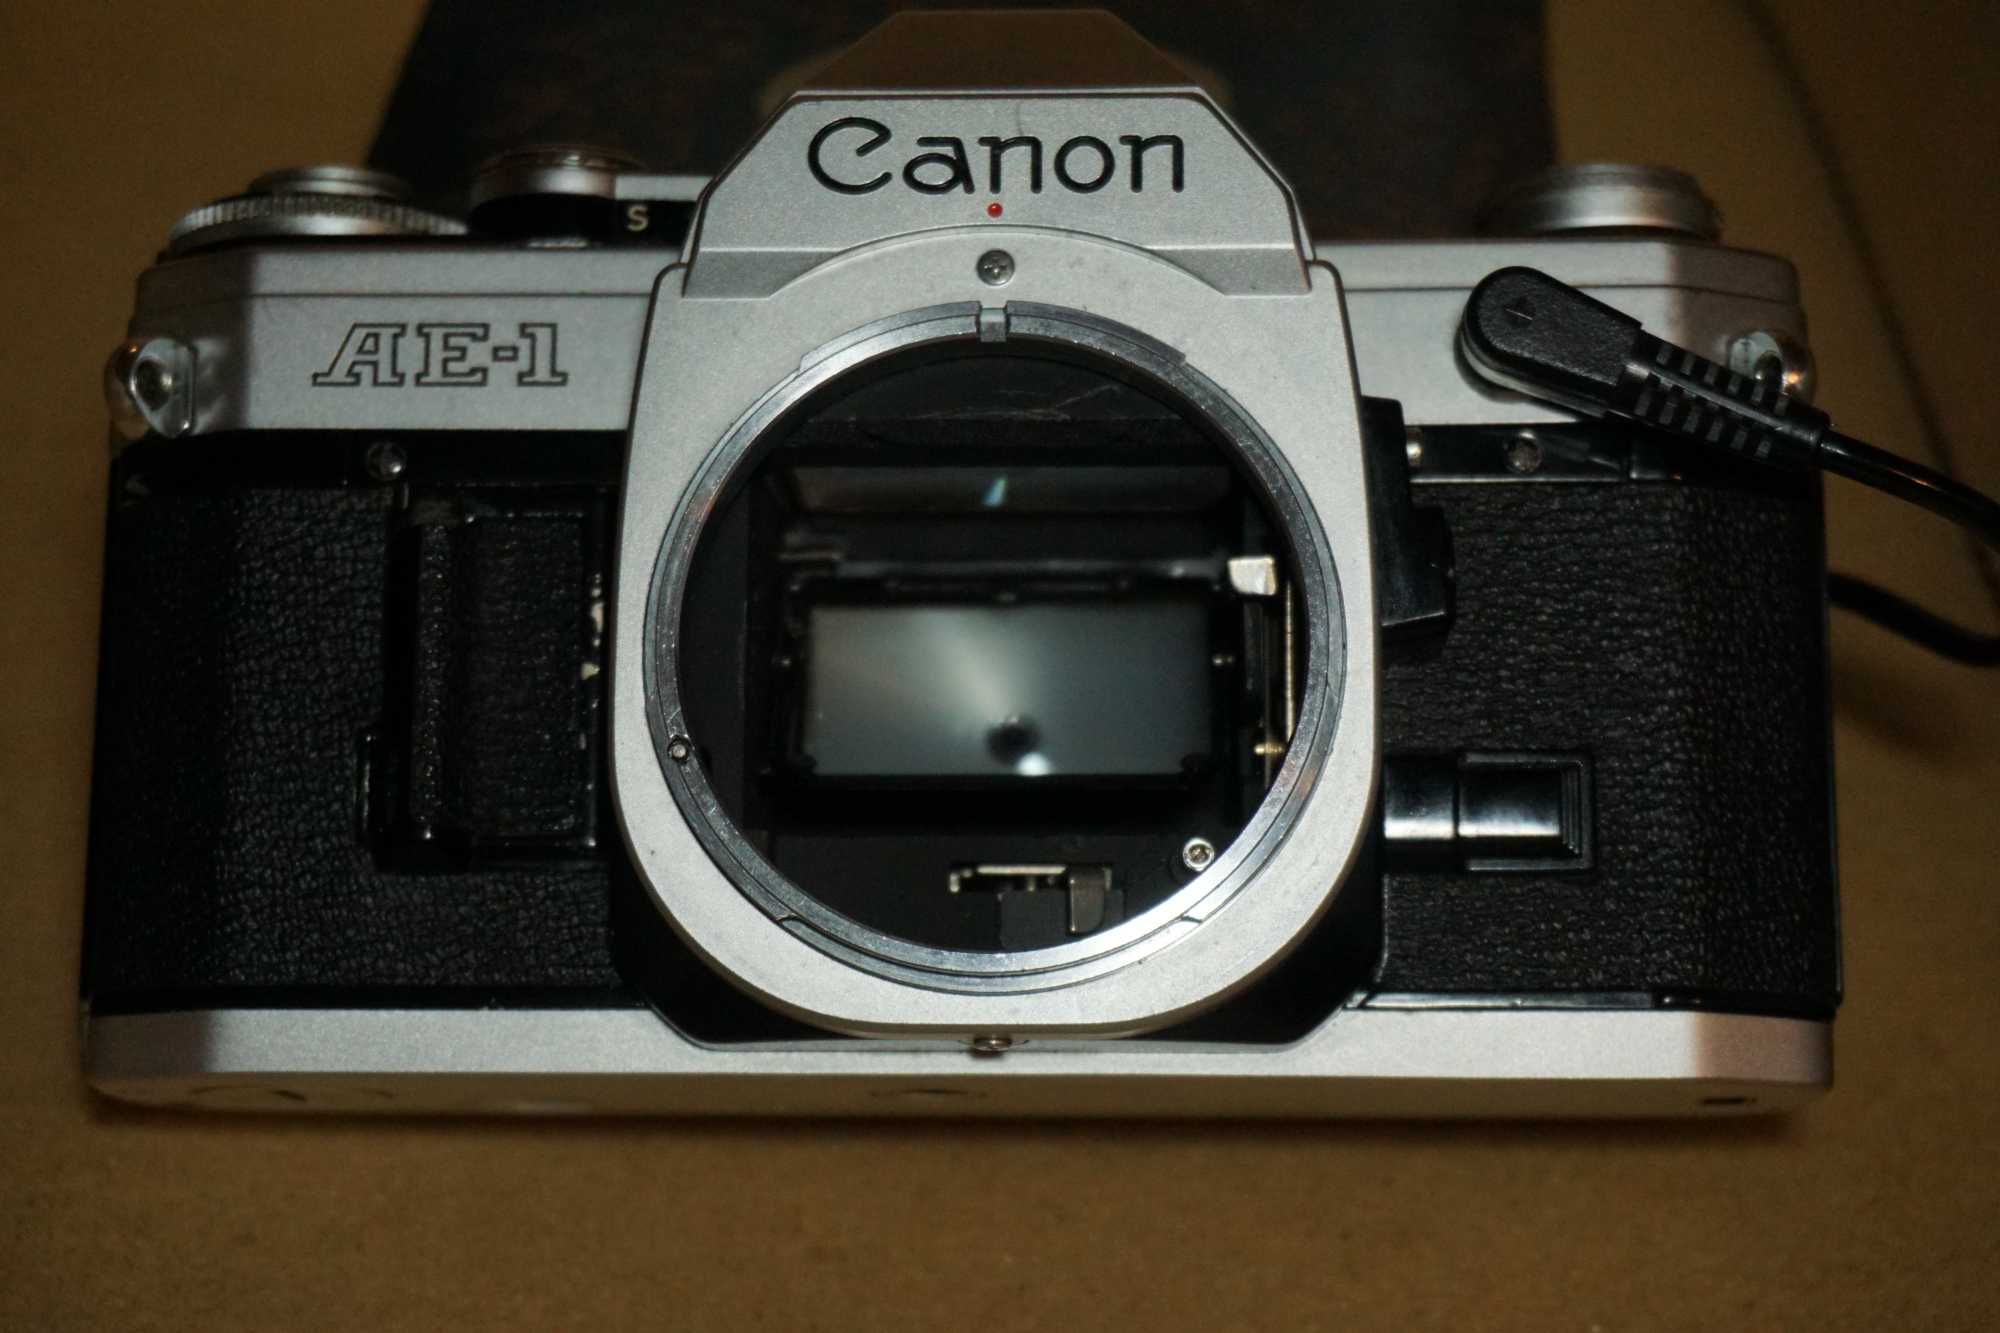 Cannon AE-1 c/ Databack + Obj 28mm f/2.8